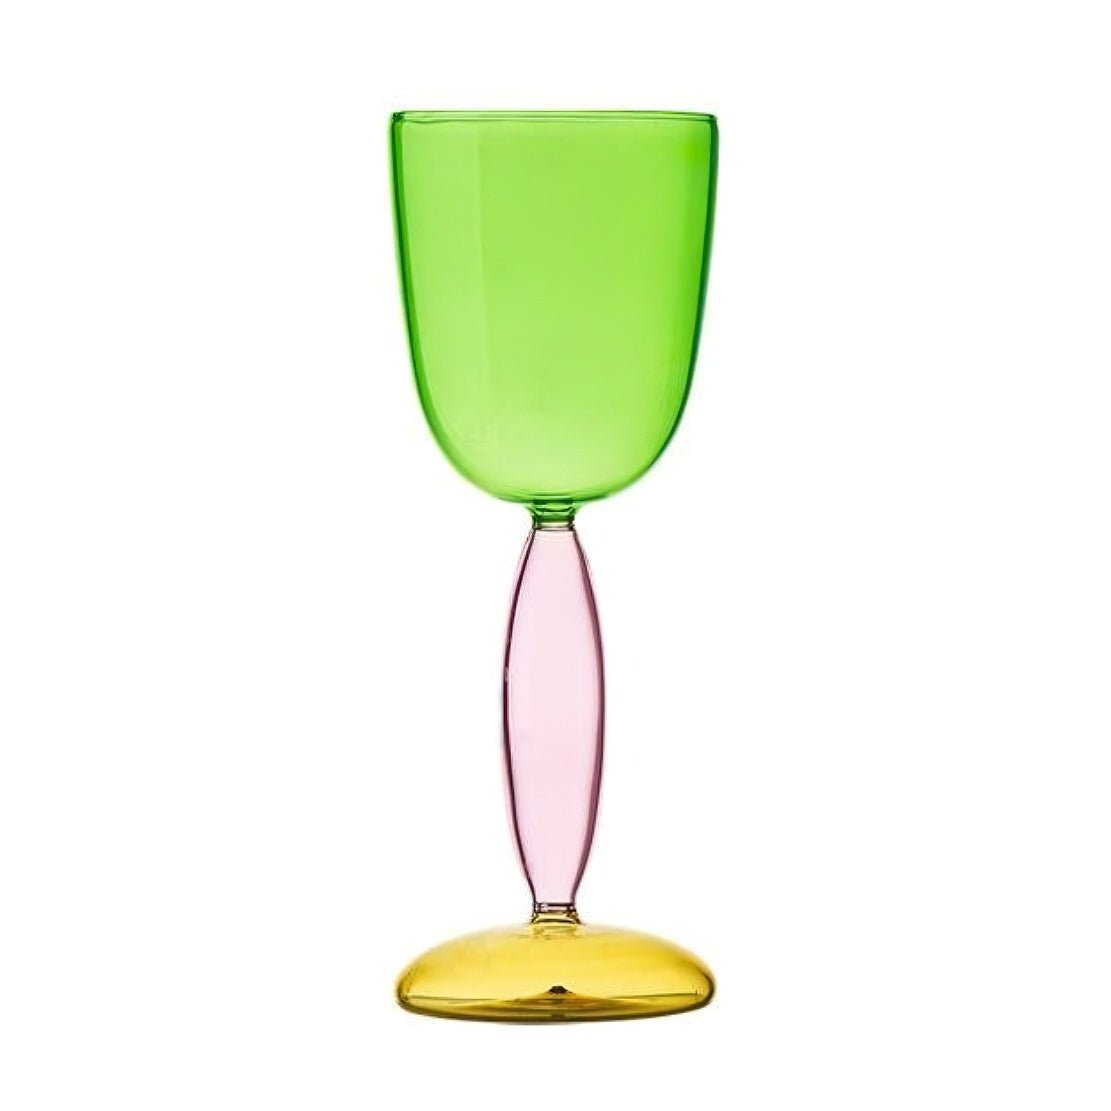 Green glass goblet with pink stem and yellow bottom.